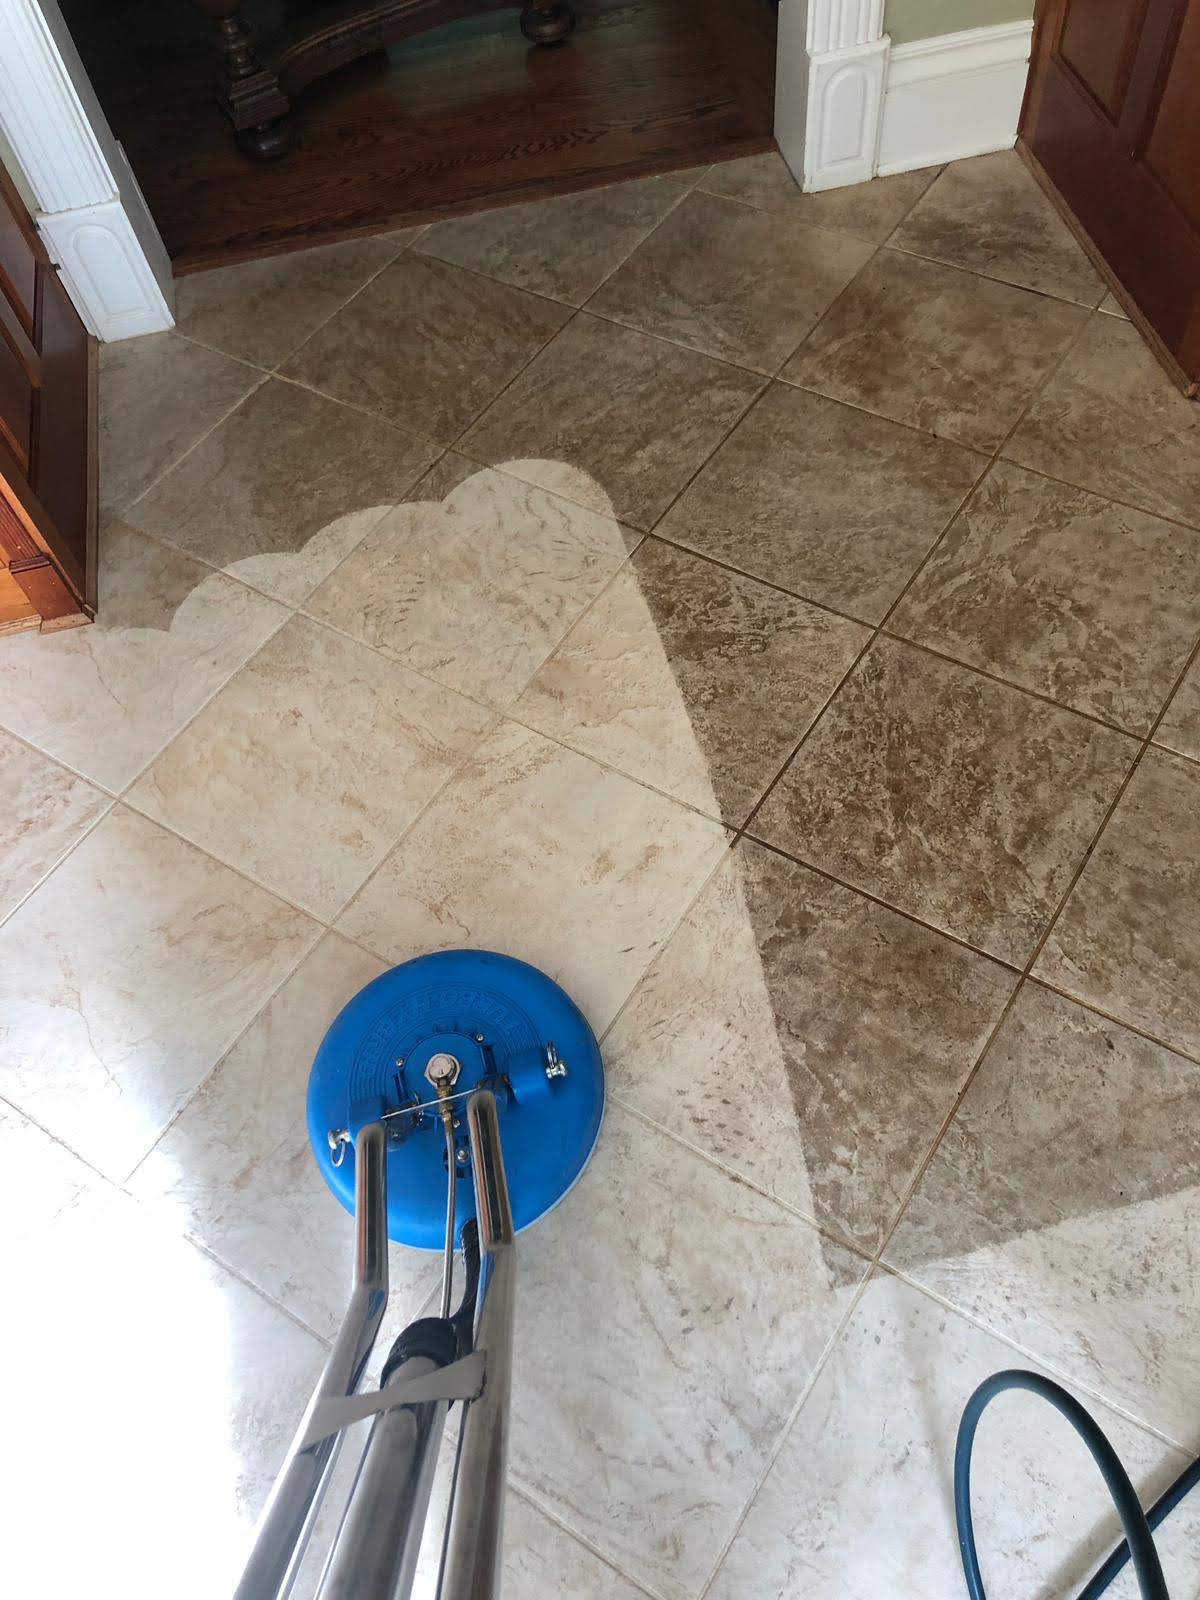 Tile and Grout Cleaning - Smart Choice Cleaning